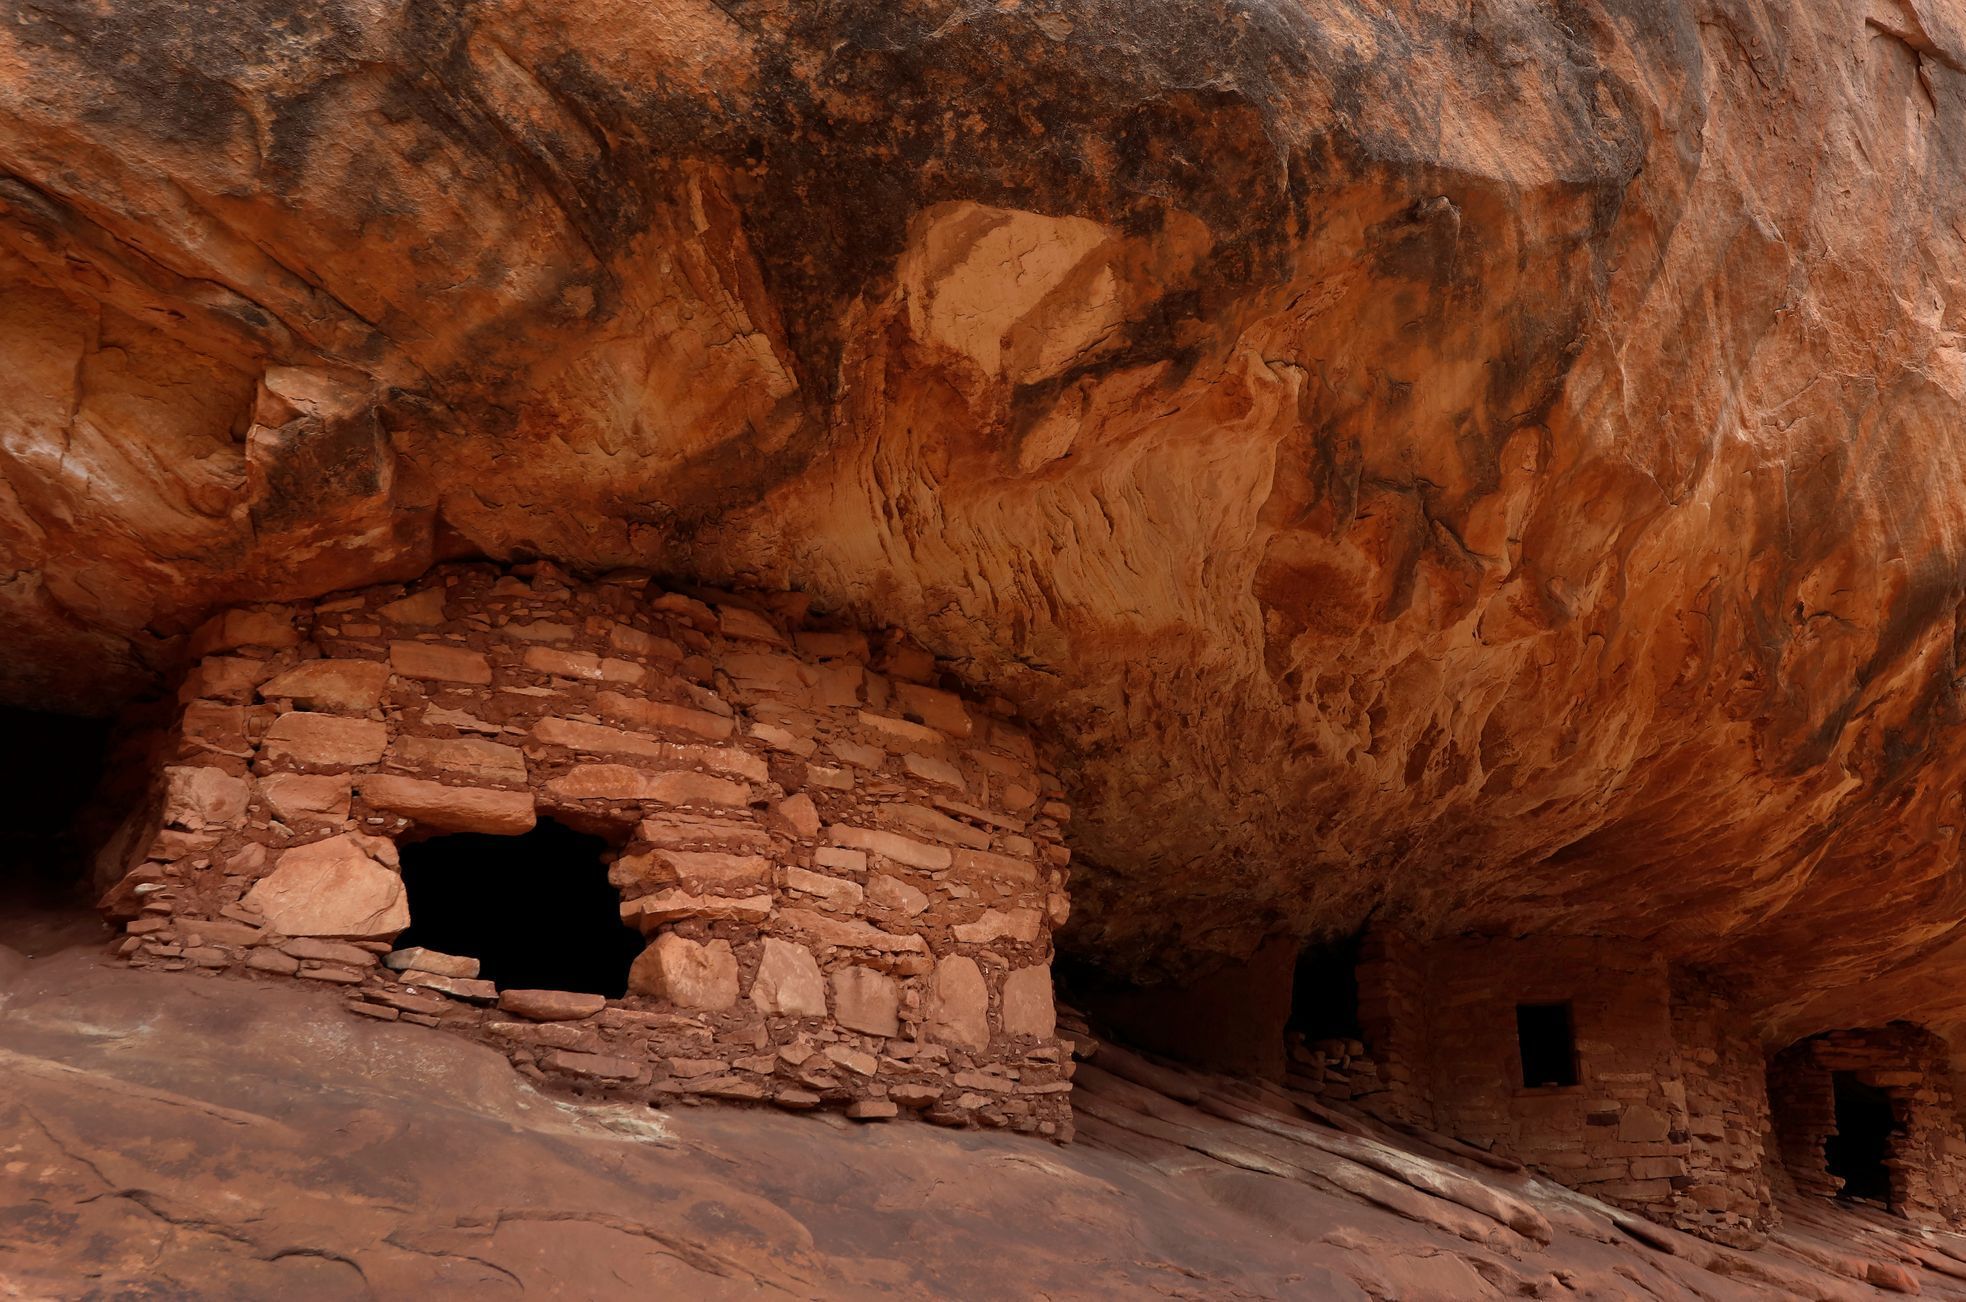 The 'House on Fire' ruin, located in Mule Canyon in Bears Ears National Monument